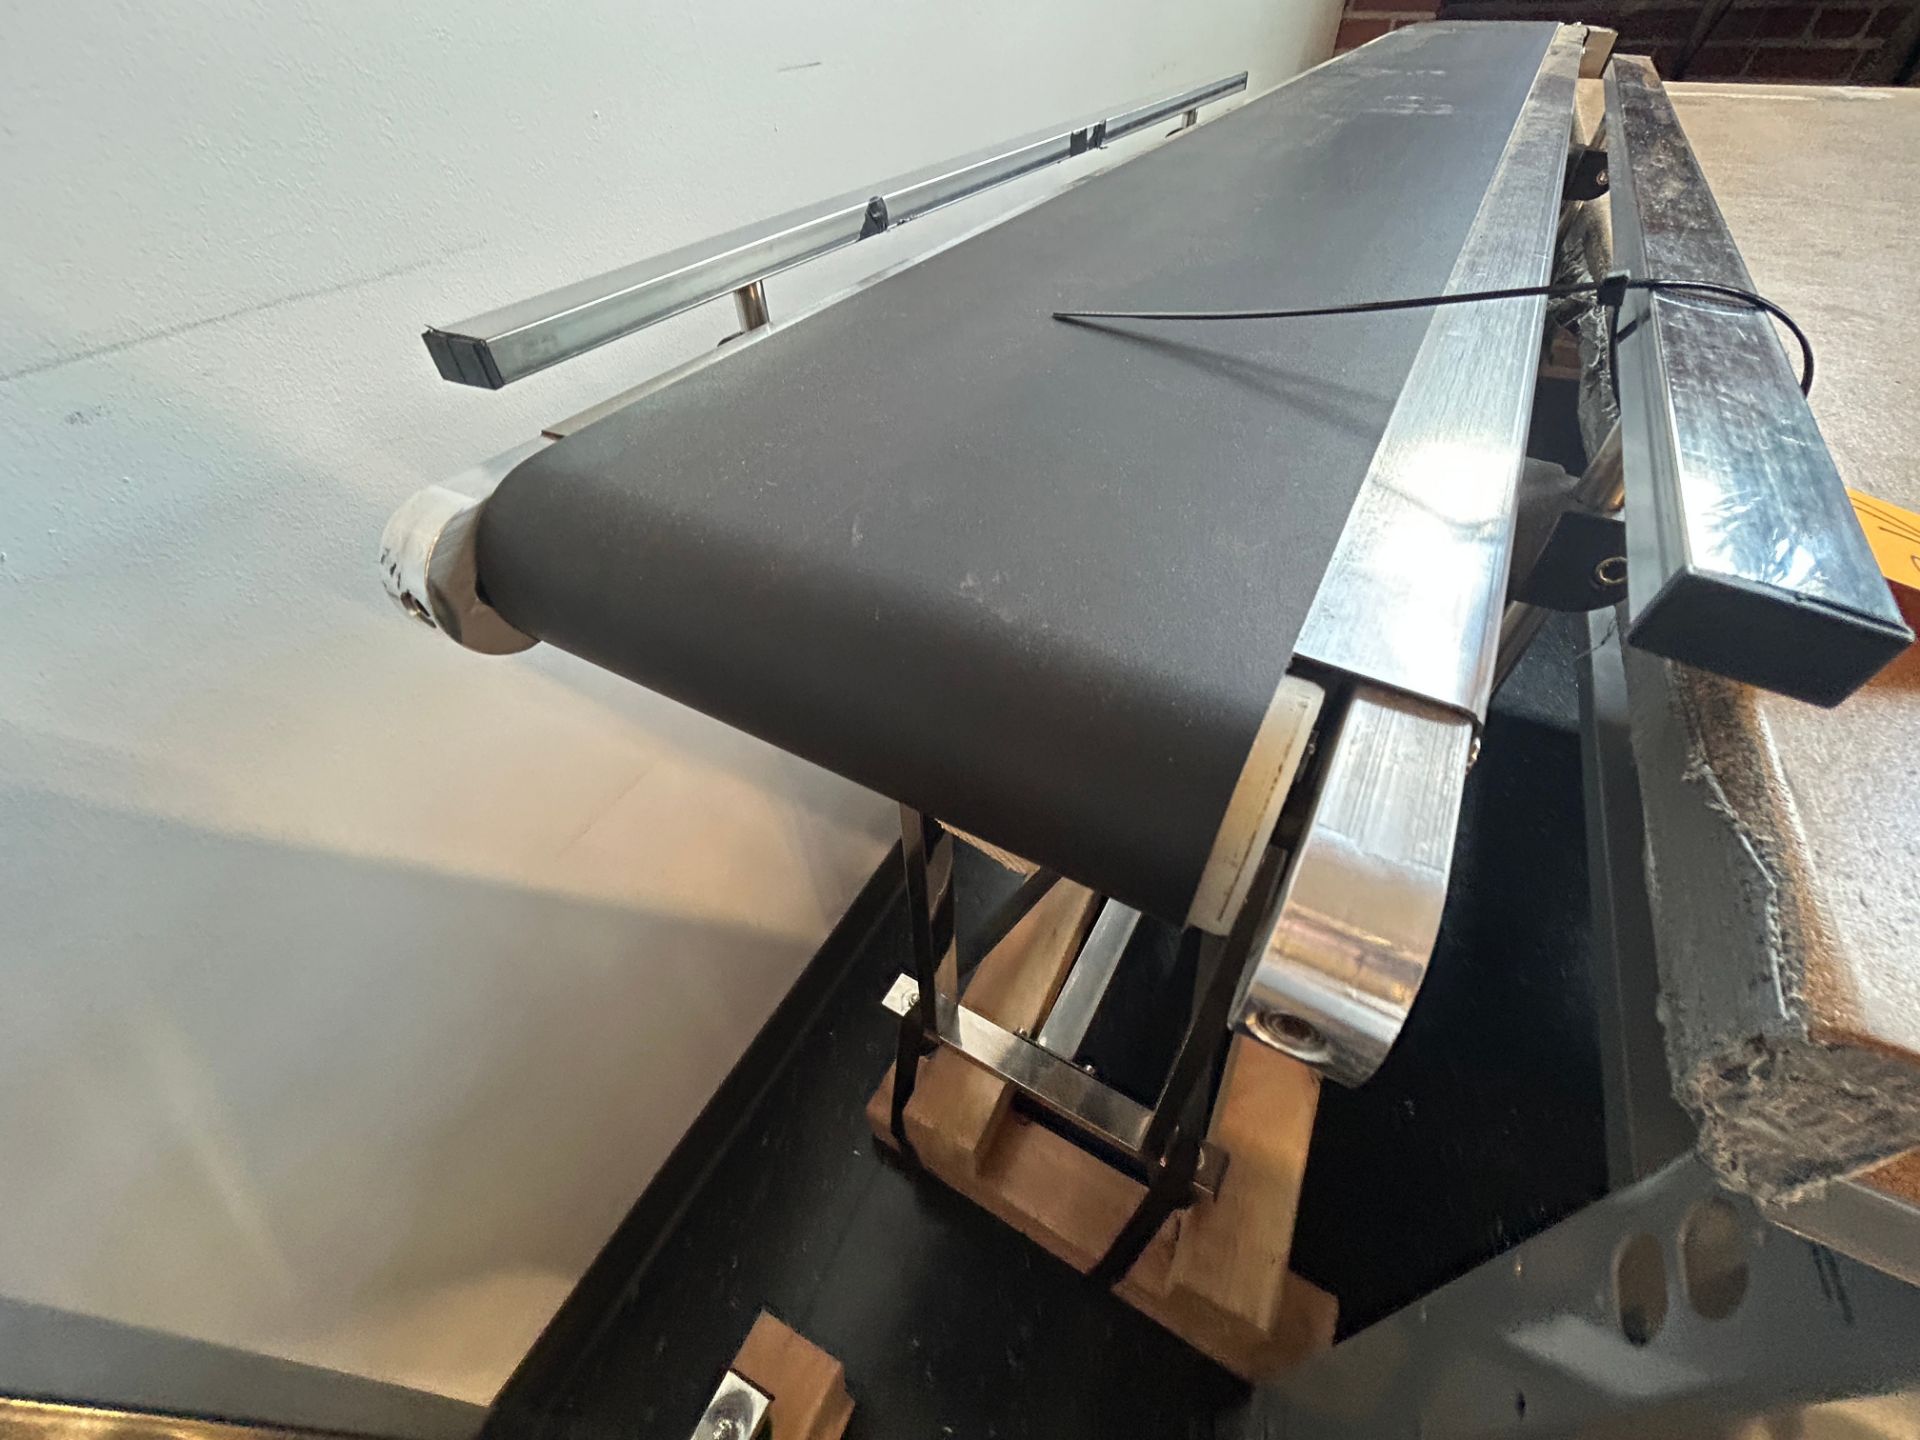 Vevor Mdl ITC Adjustable, 12 Inch Wide x 56 Inch Long Flat Belt Conveyor With Variable Speed - Image 2 of 4